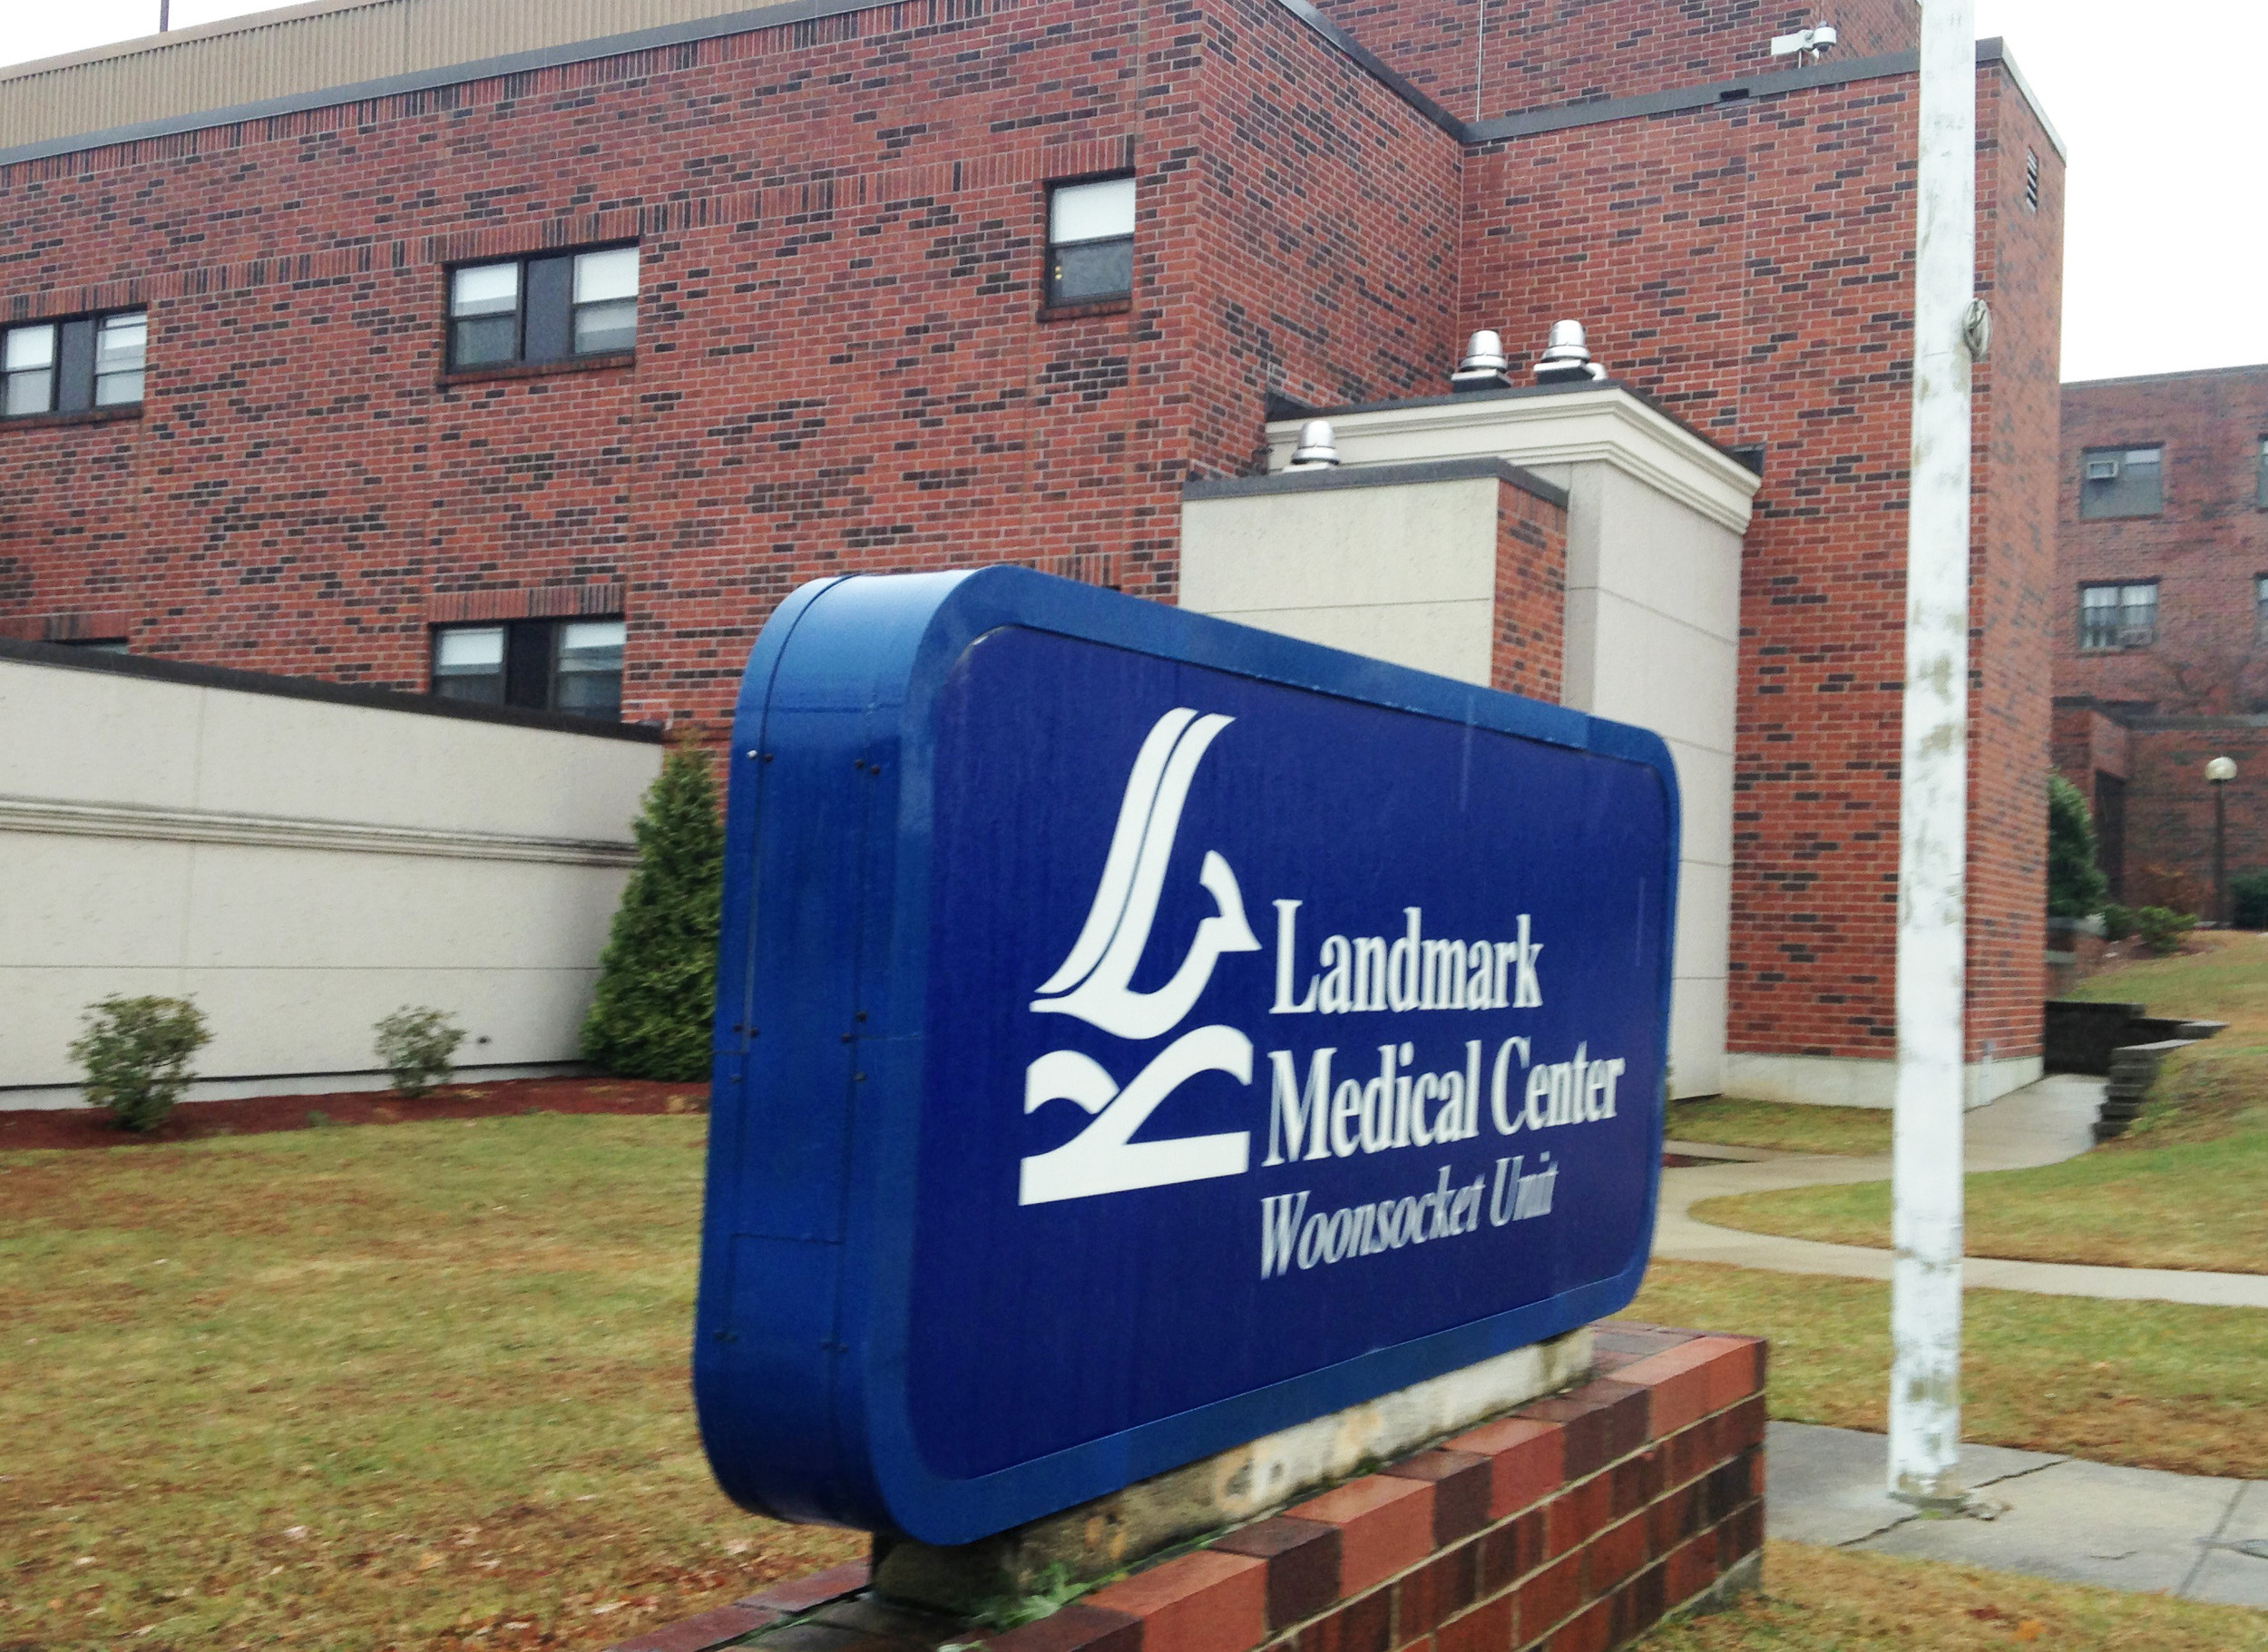 UnitedHealthcare has asked to remove Landmark from its network of hospitals. Public comment on the proposed change closes on April 20.